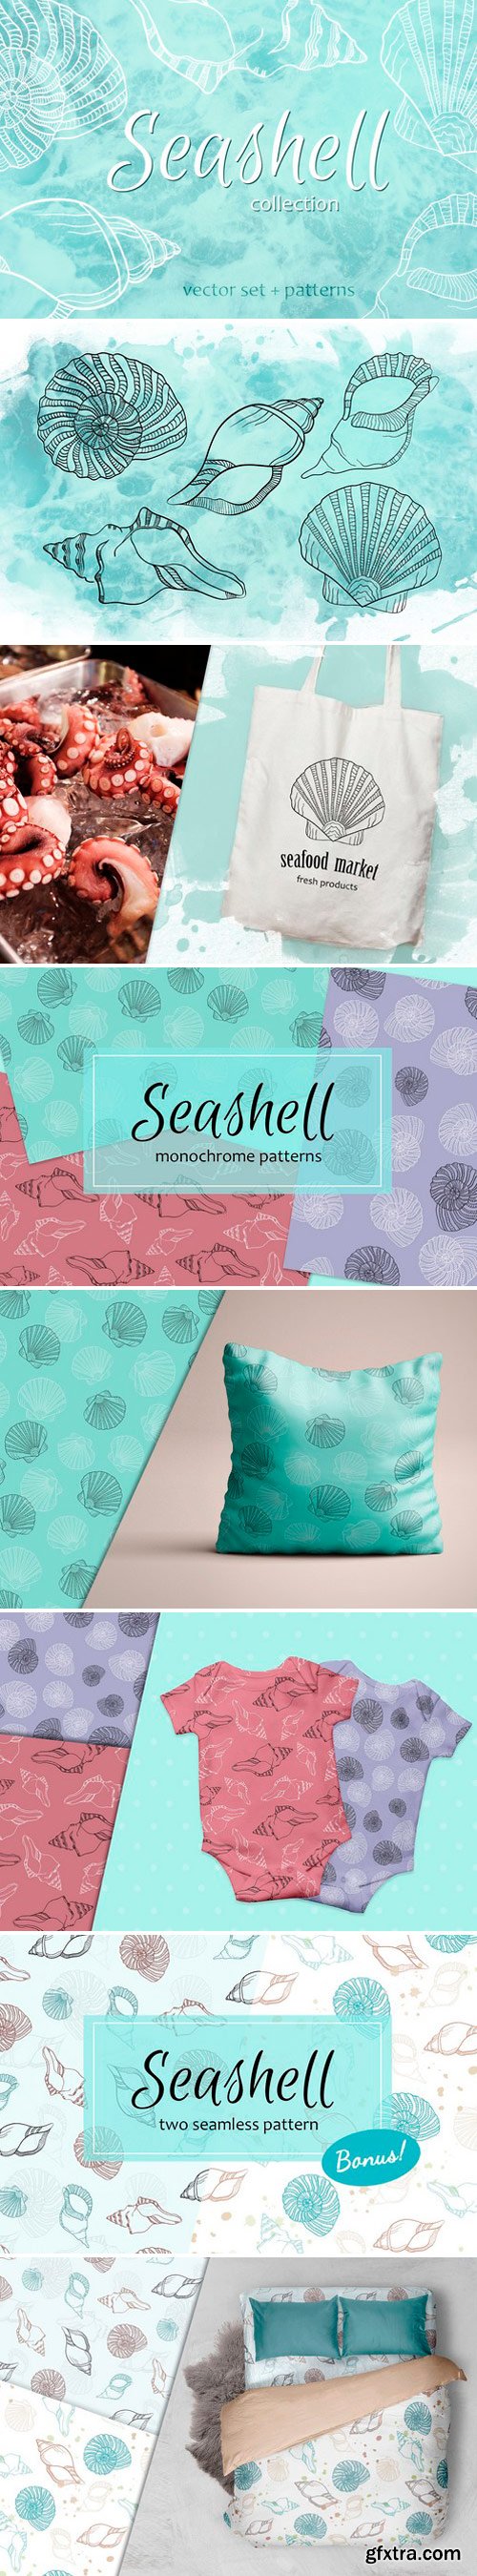 CM - Seashell collection of patterns 2487066